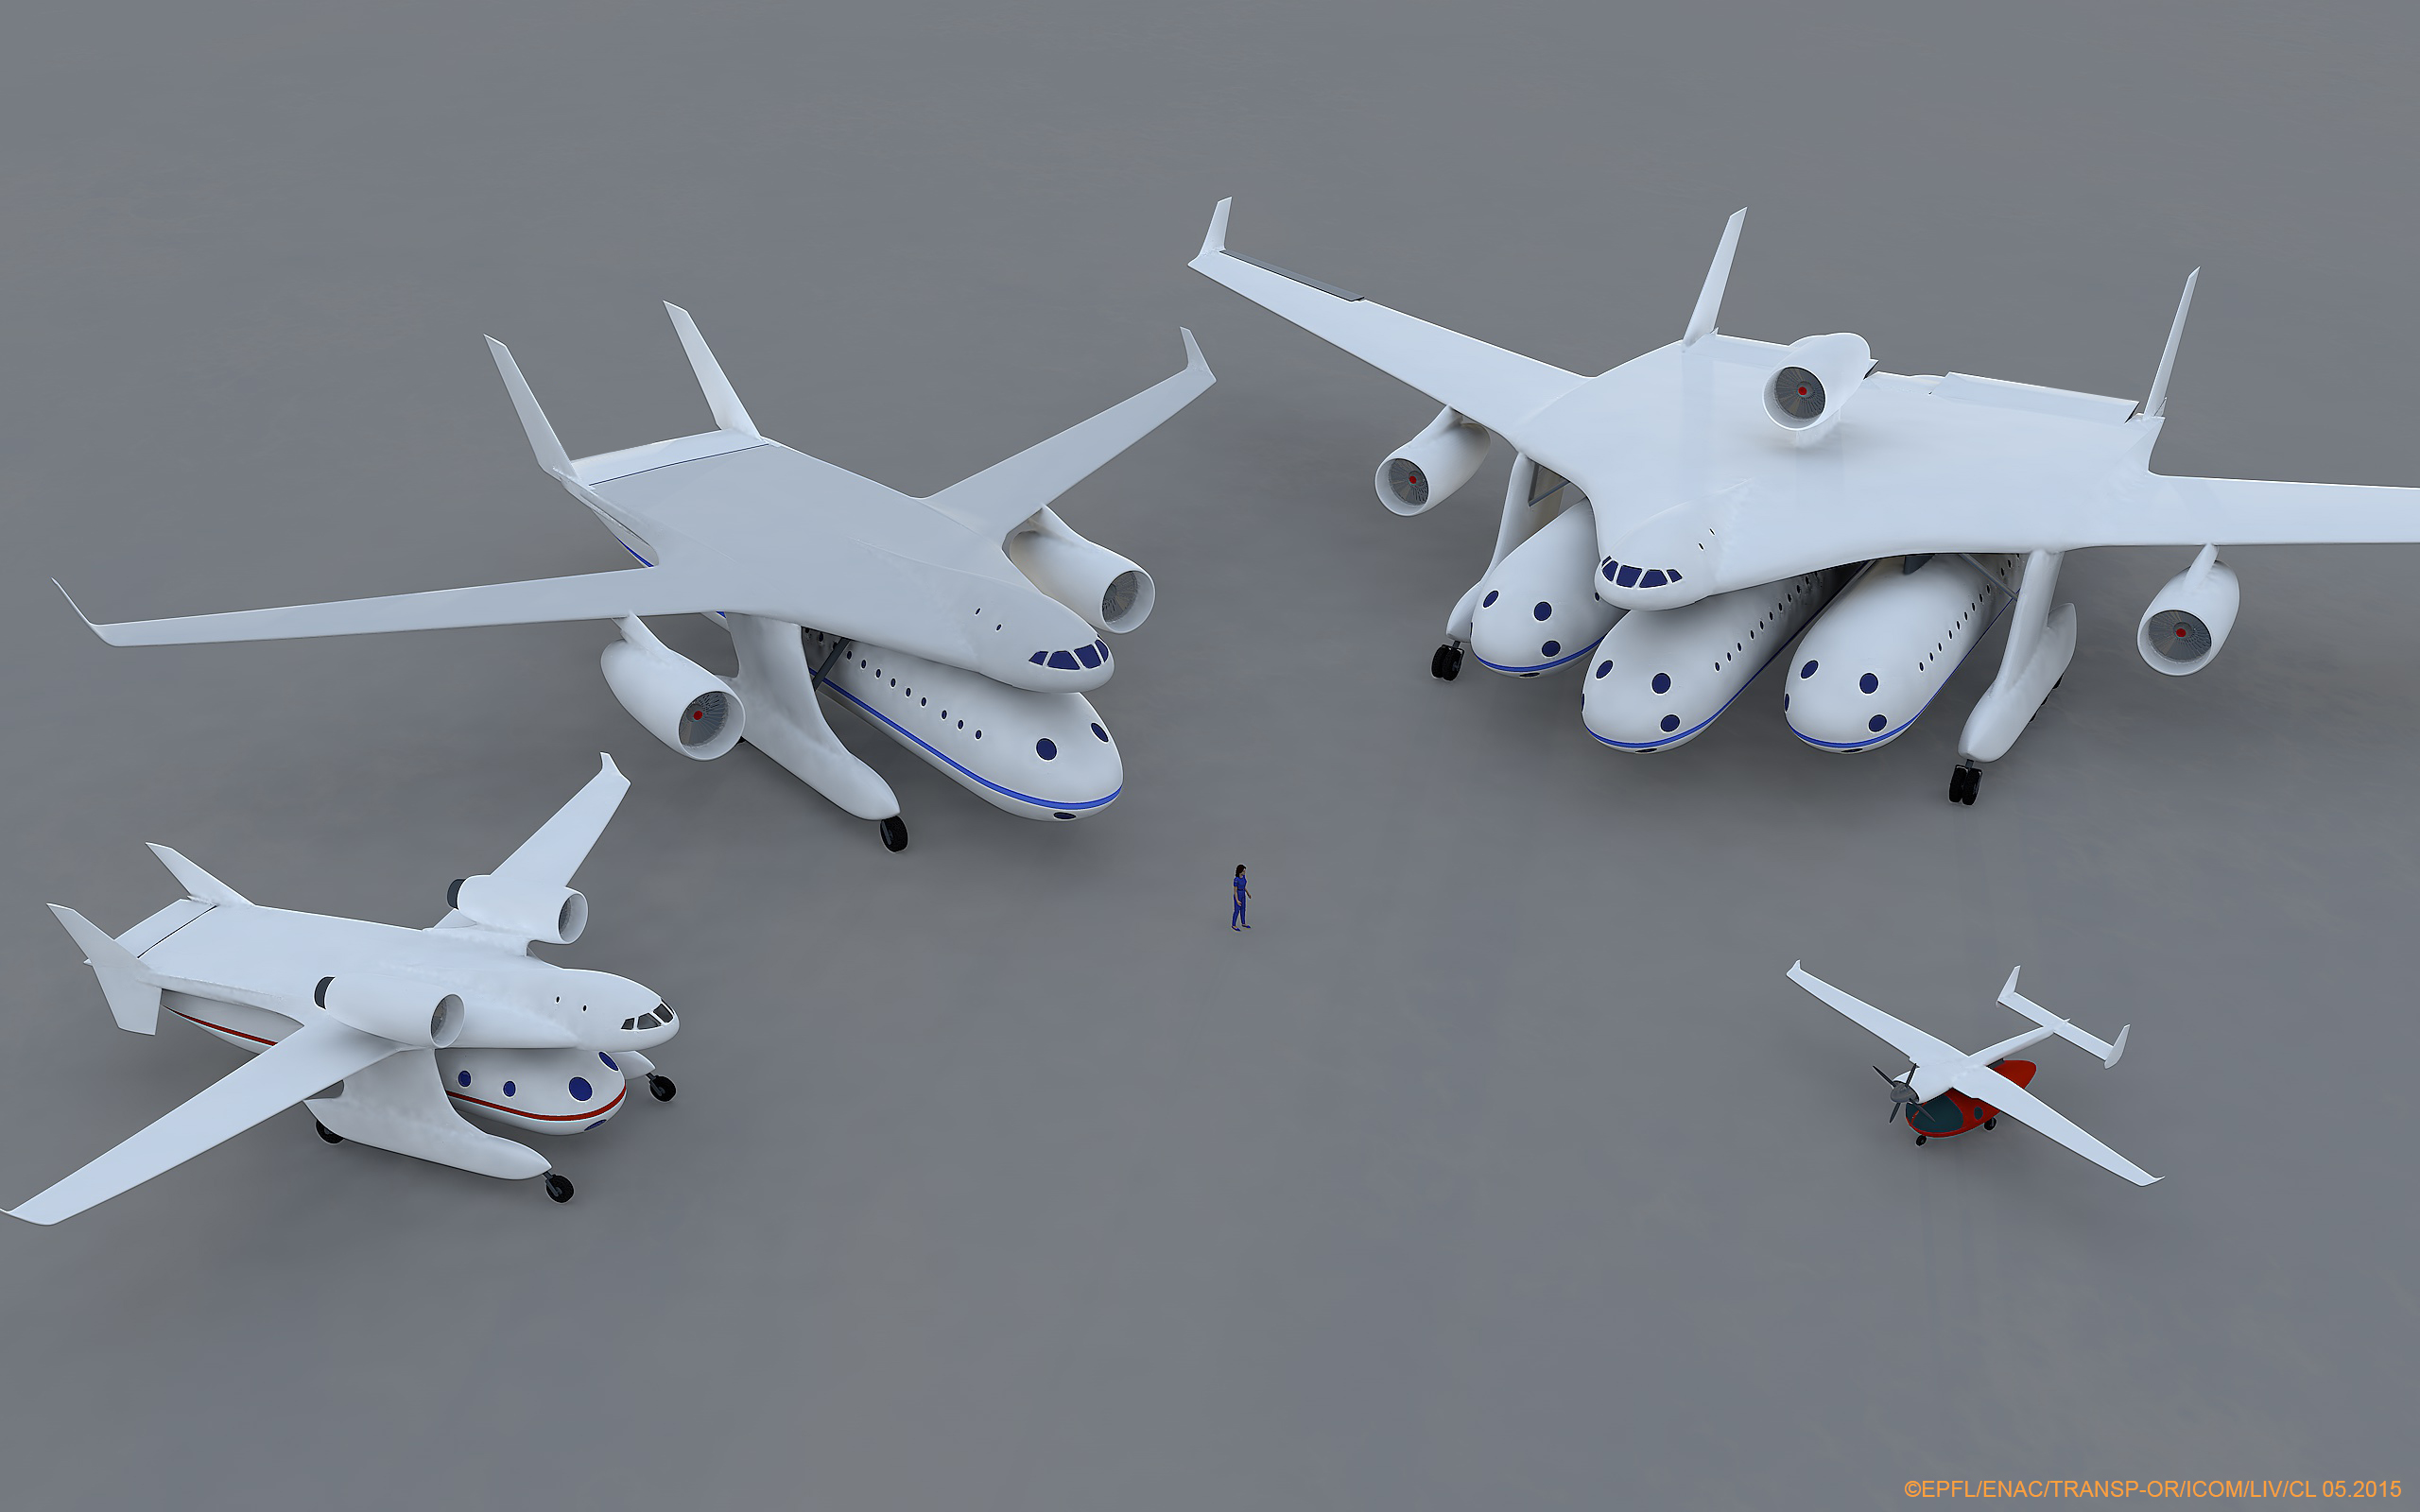 Modular Plane Concept Treats Passenger Cabin Like A Shipping Container